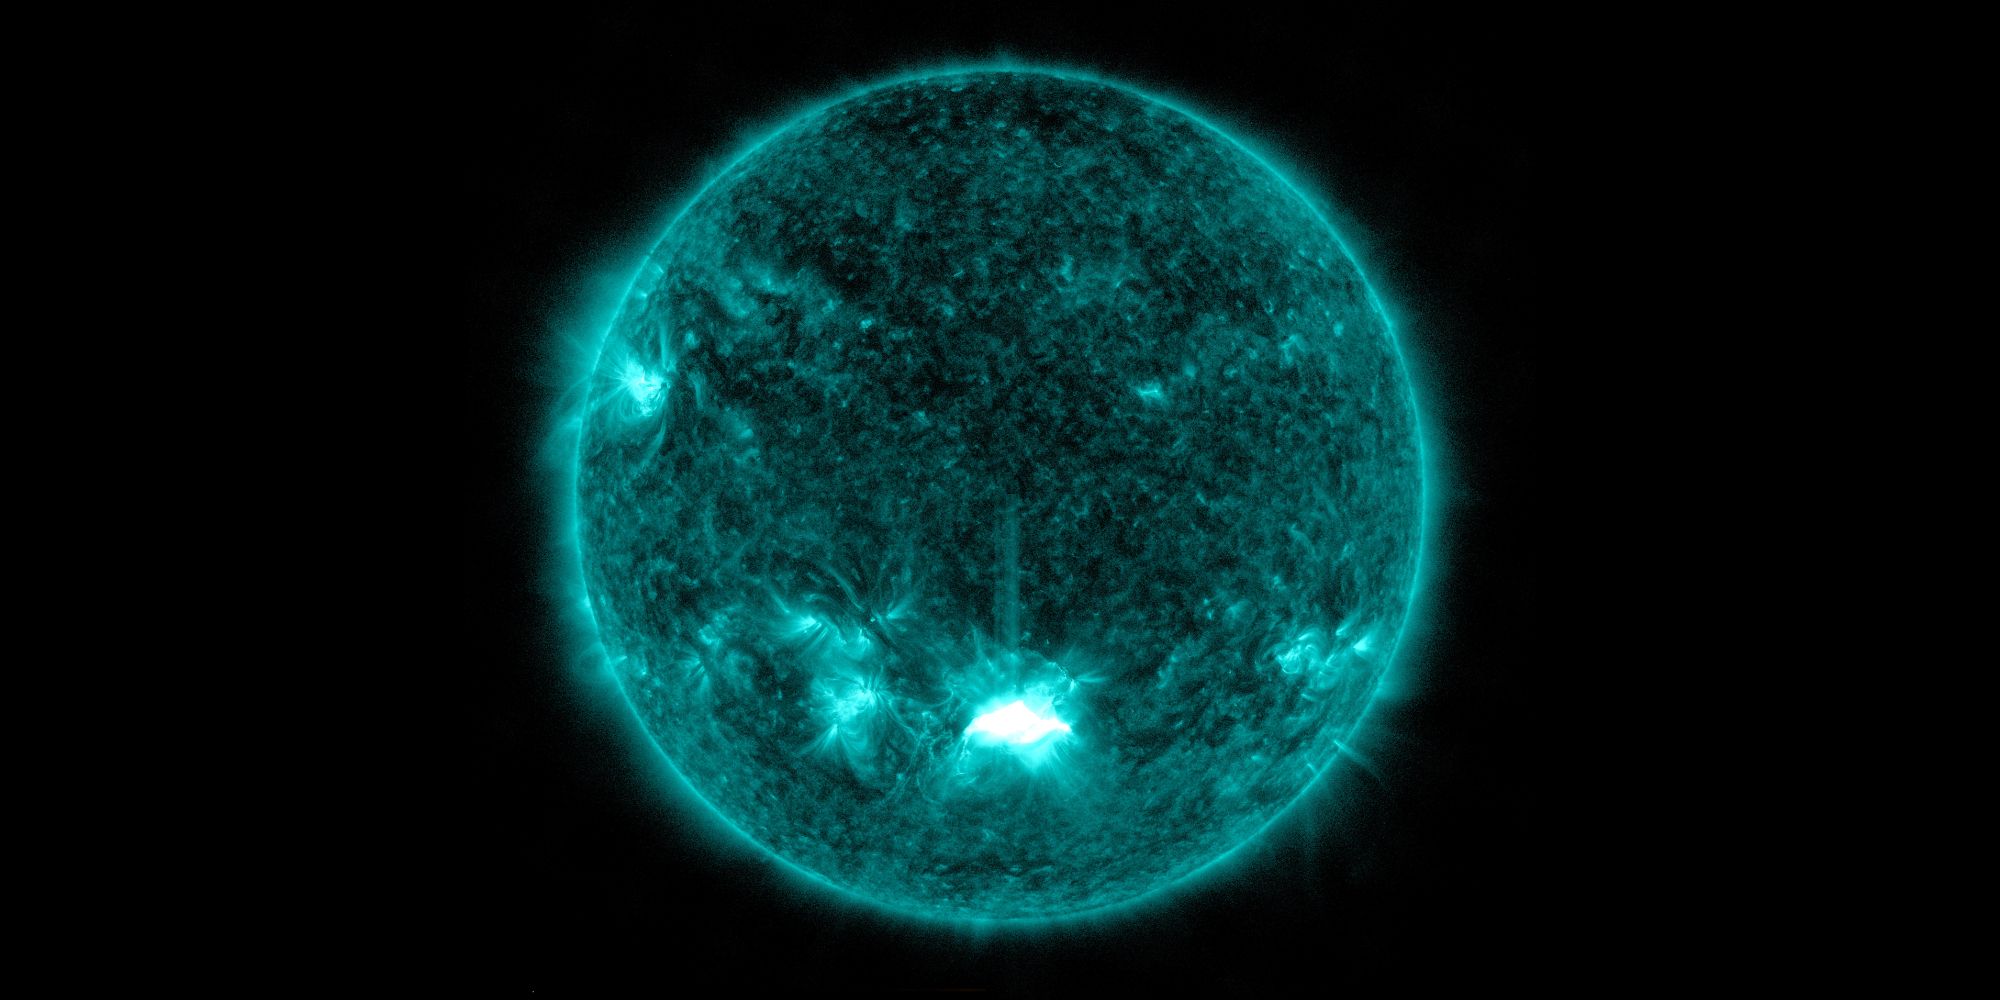 NASA Captures Enormous Solar Flare In Stunning New Photo